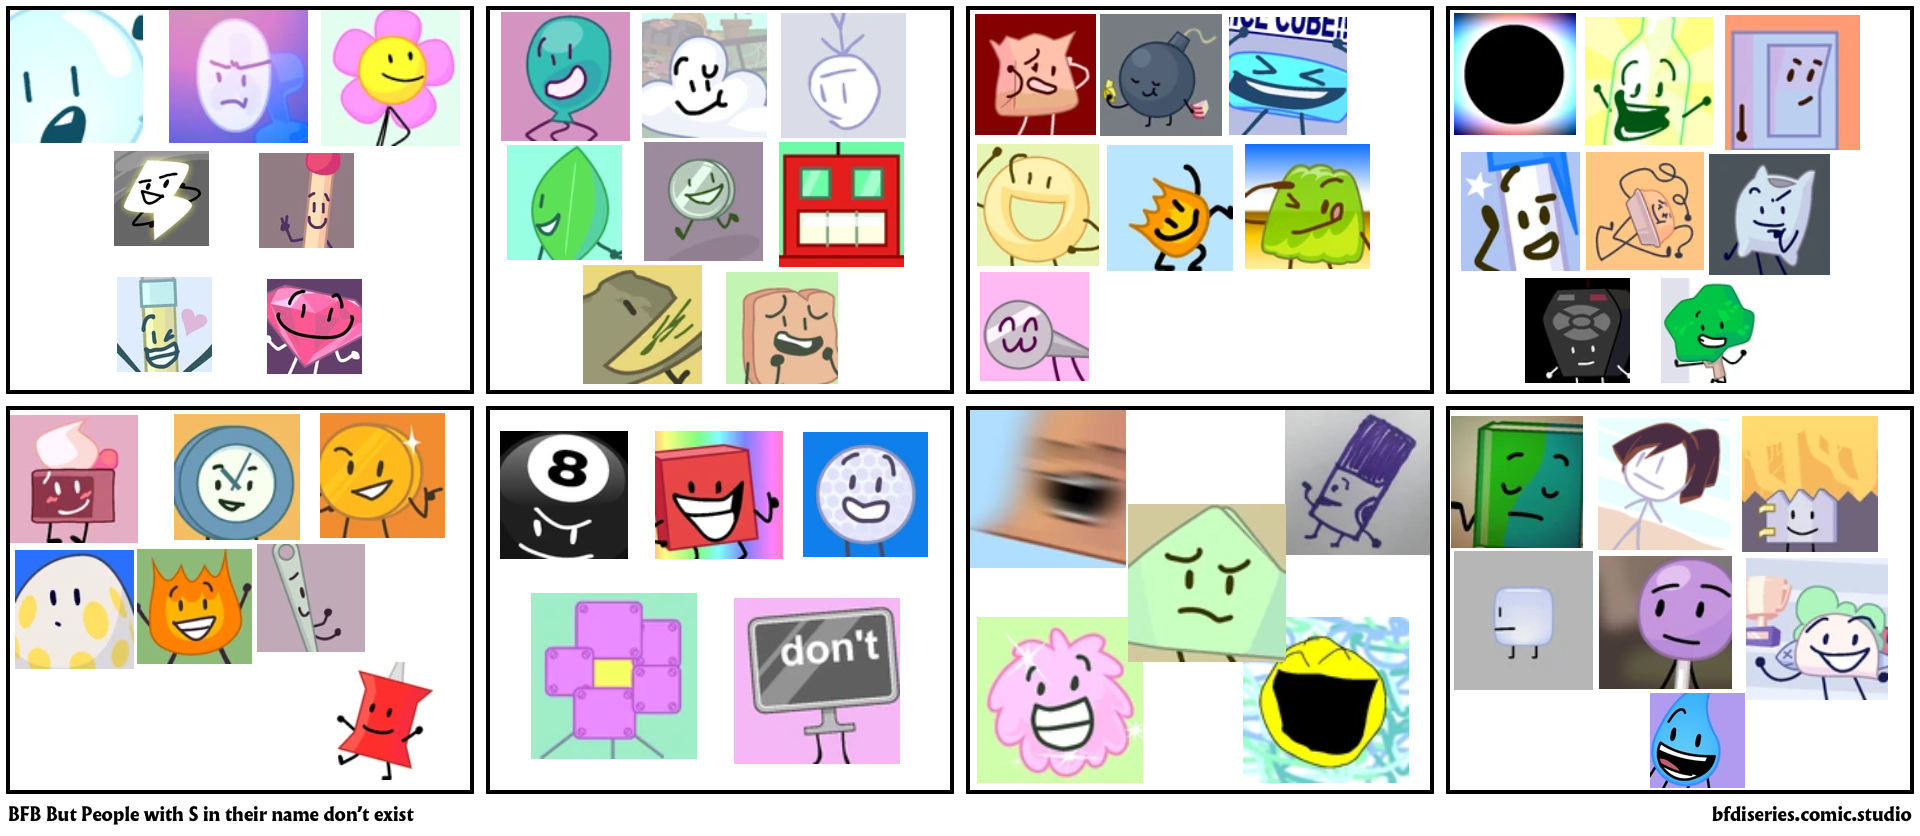 BFB But People with S in their name don’t exist